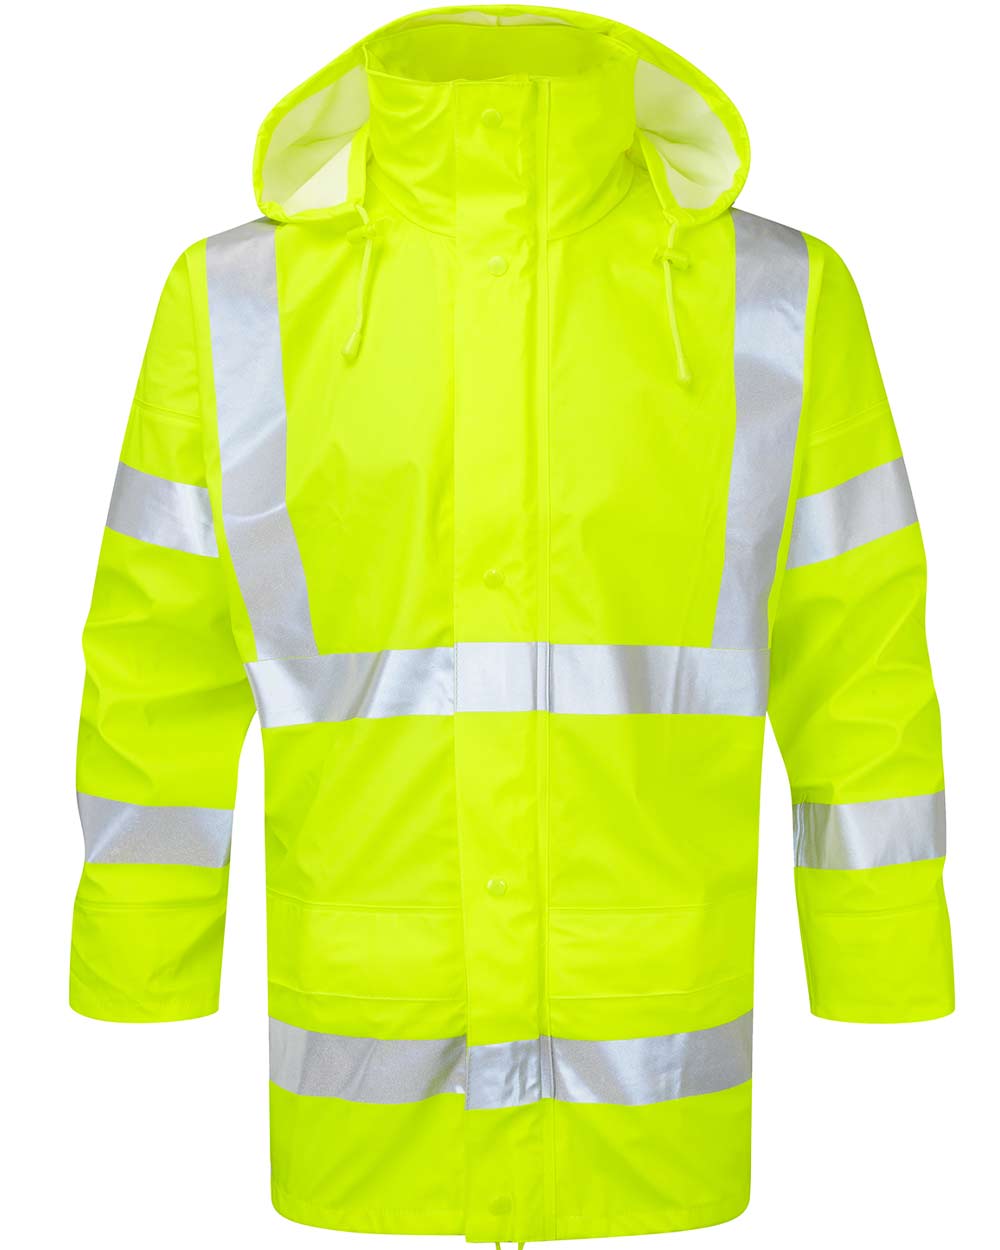 Fort Air Reflex Waterproof Hi-vis Jacket in yellow with reflective strips